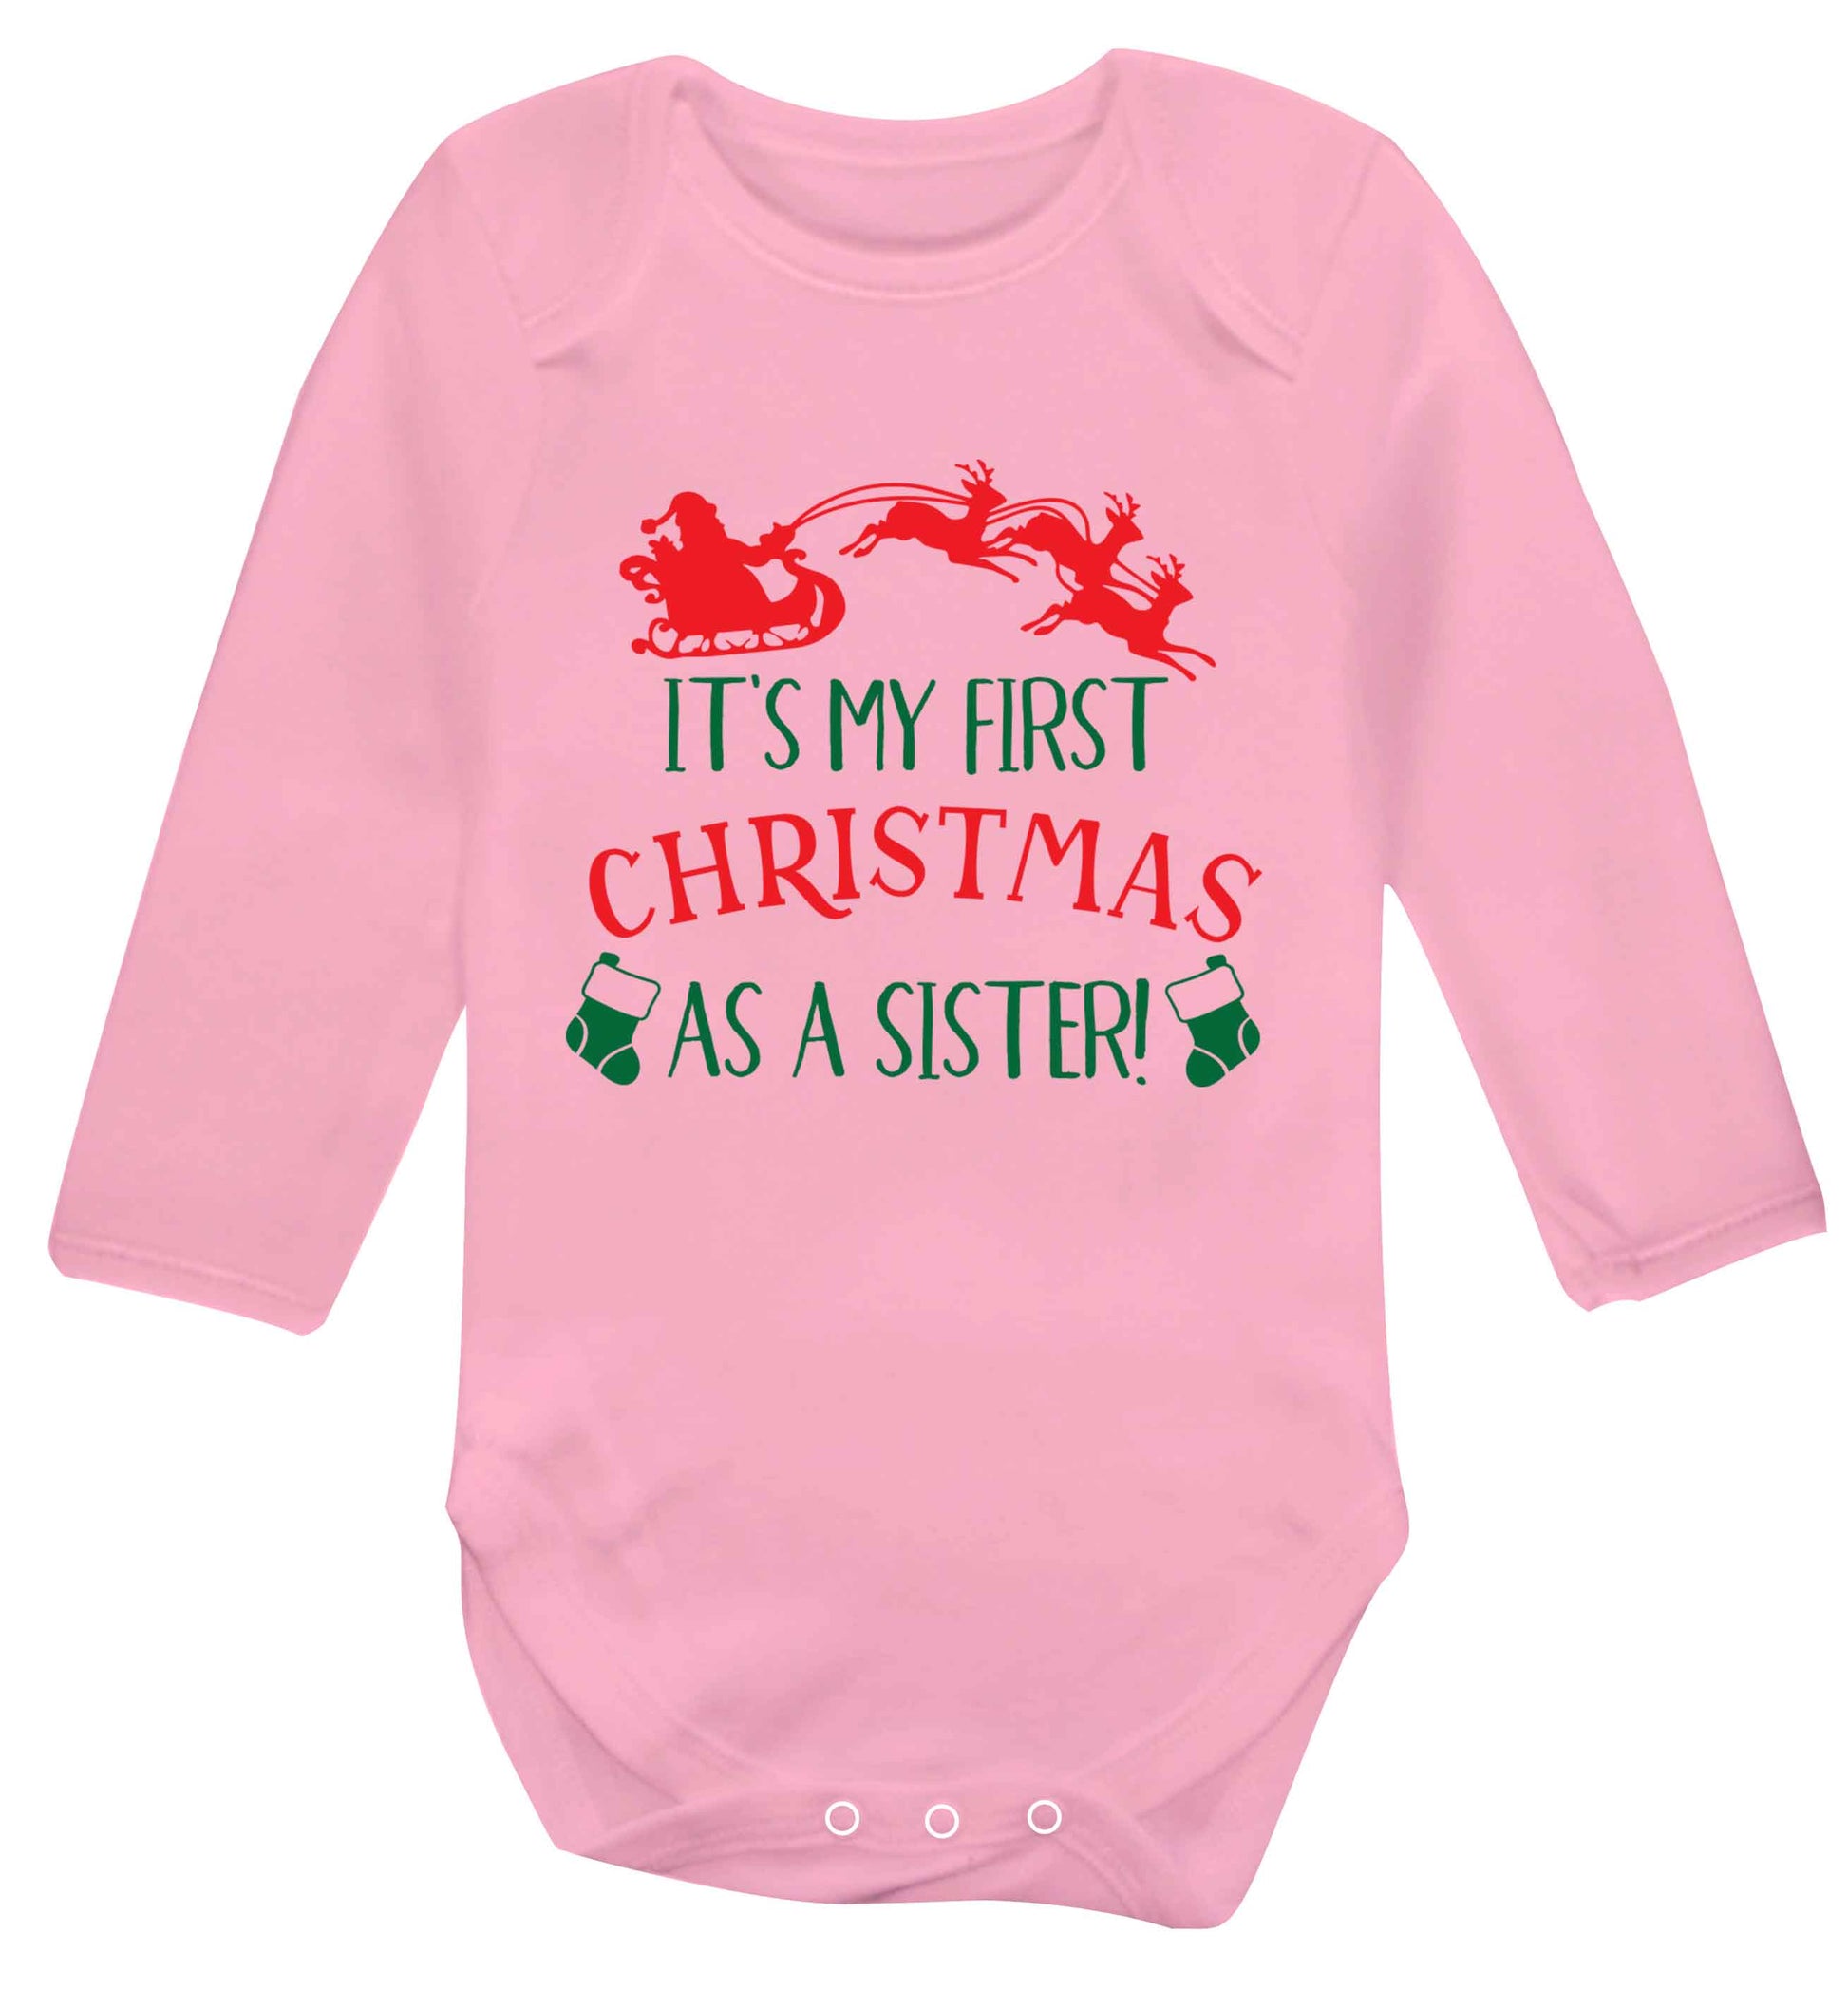 It's my first Christmas as a sister! Baby Vest long sleeved pale pink 6-12 months